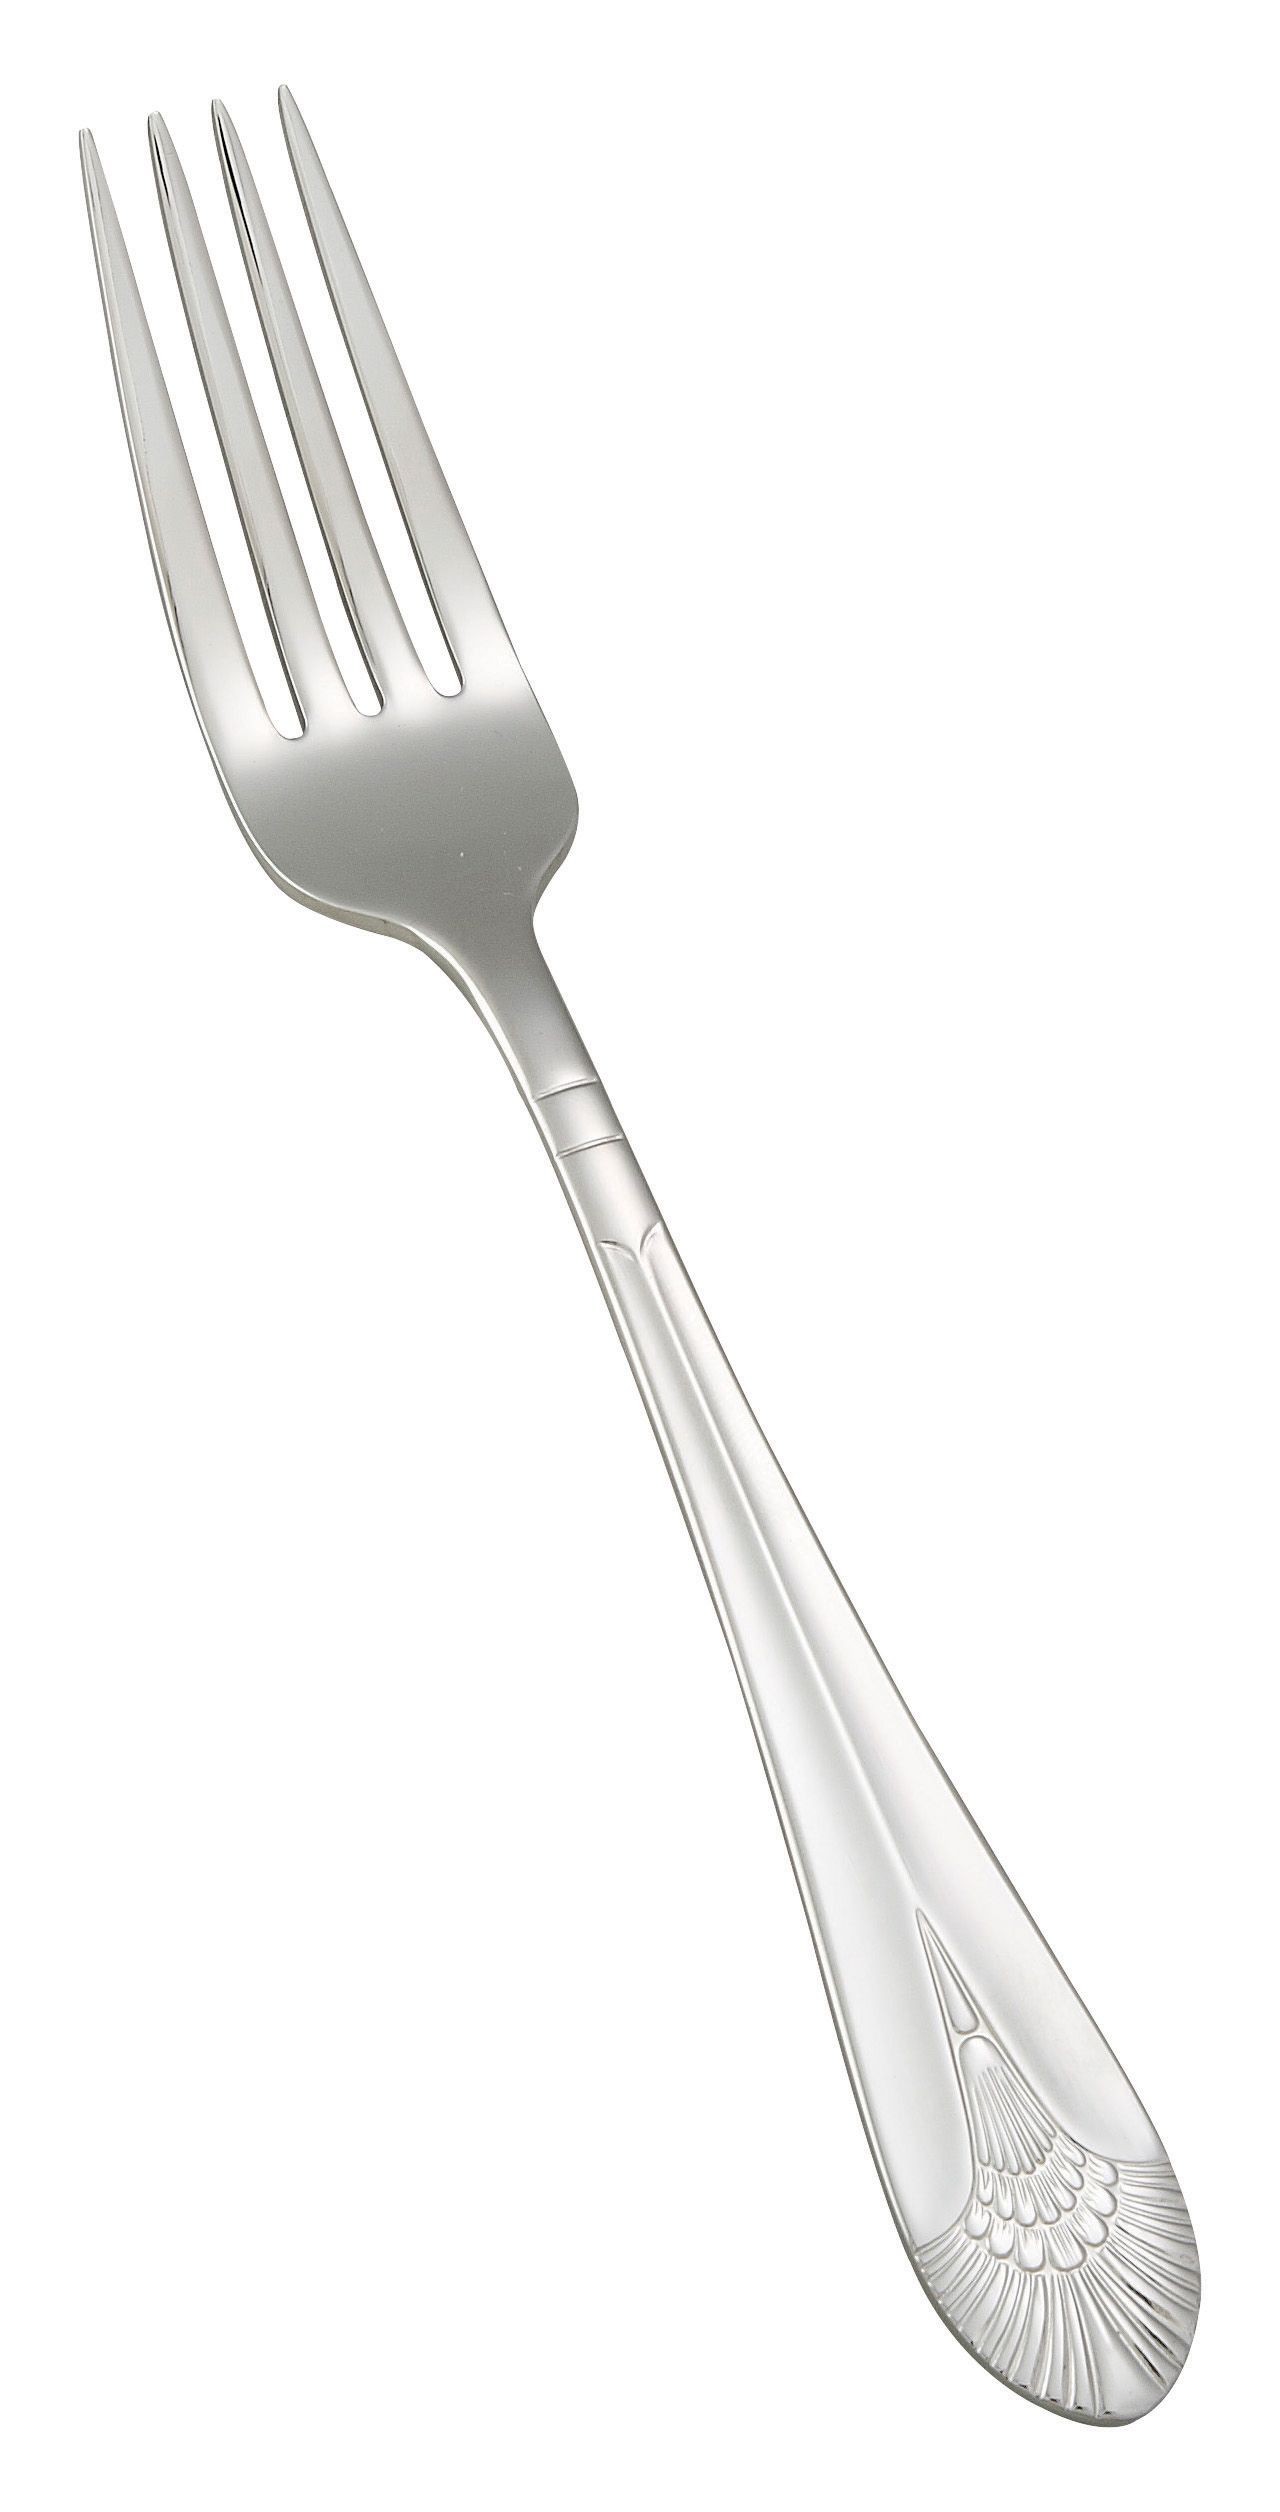 Winco 0031-11 Peacock Extra Heavy Stainless Steel European Table Fork (12/Pack)